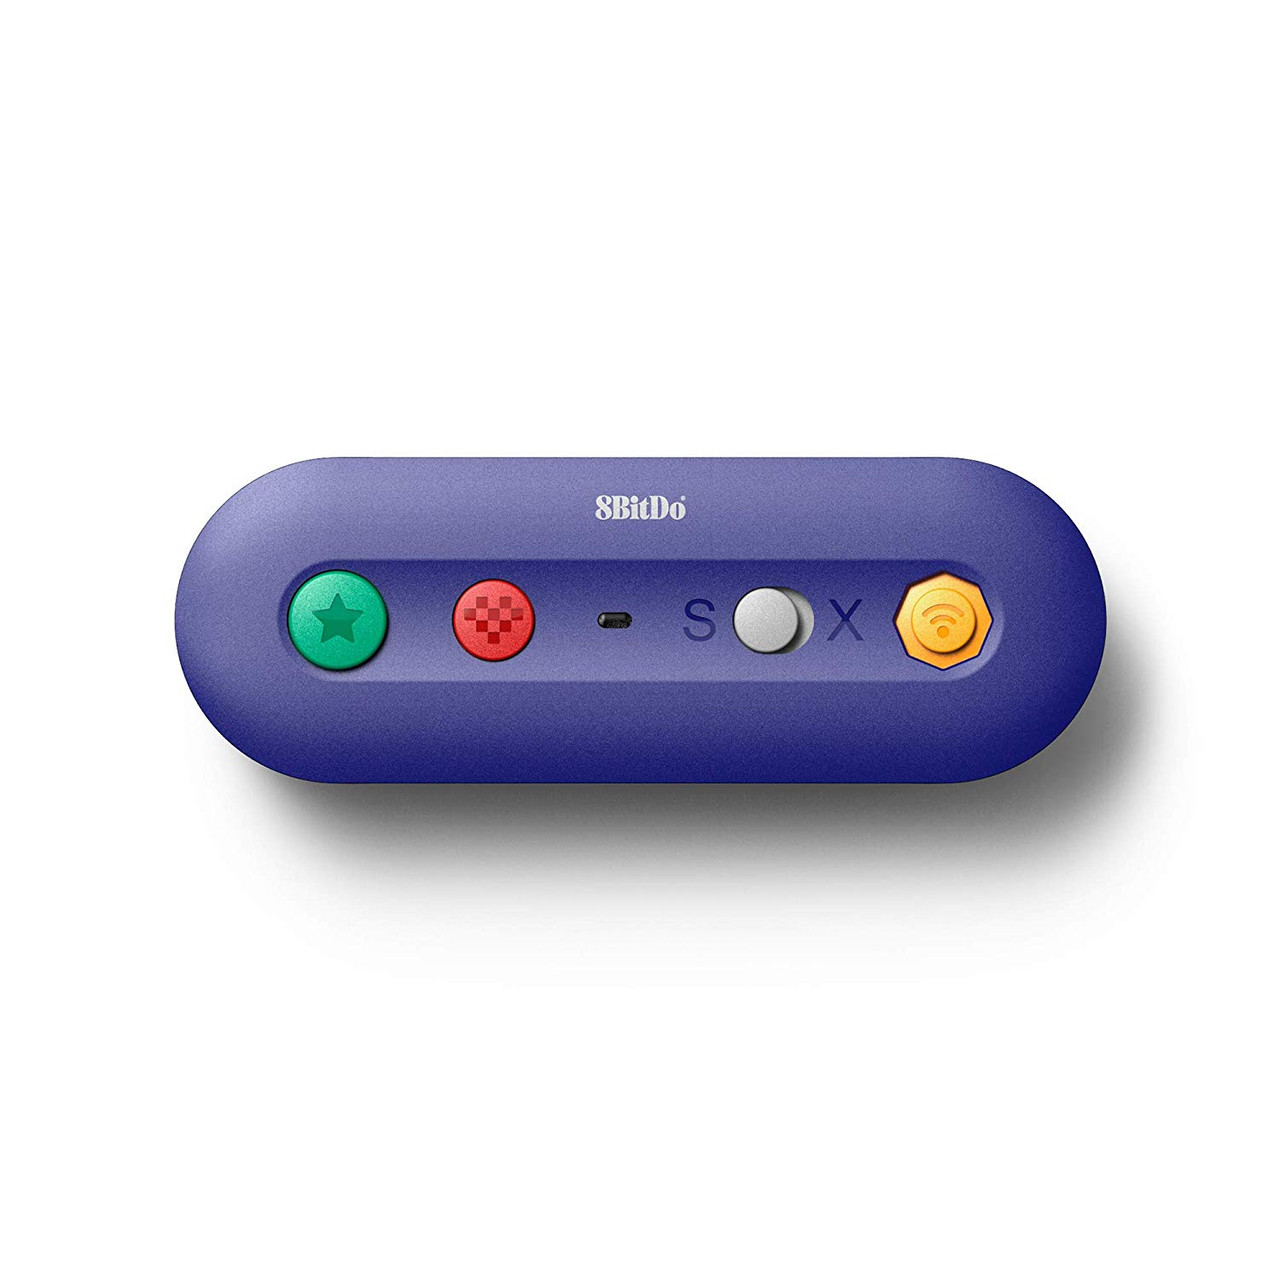 official gamecube controller adapter for pc emulators